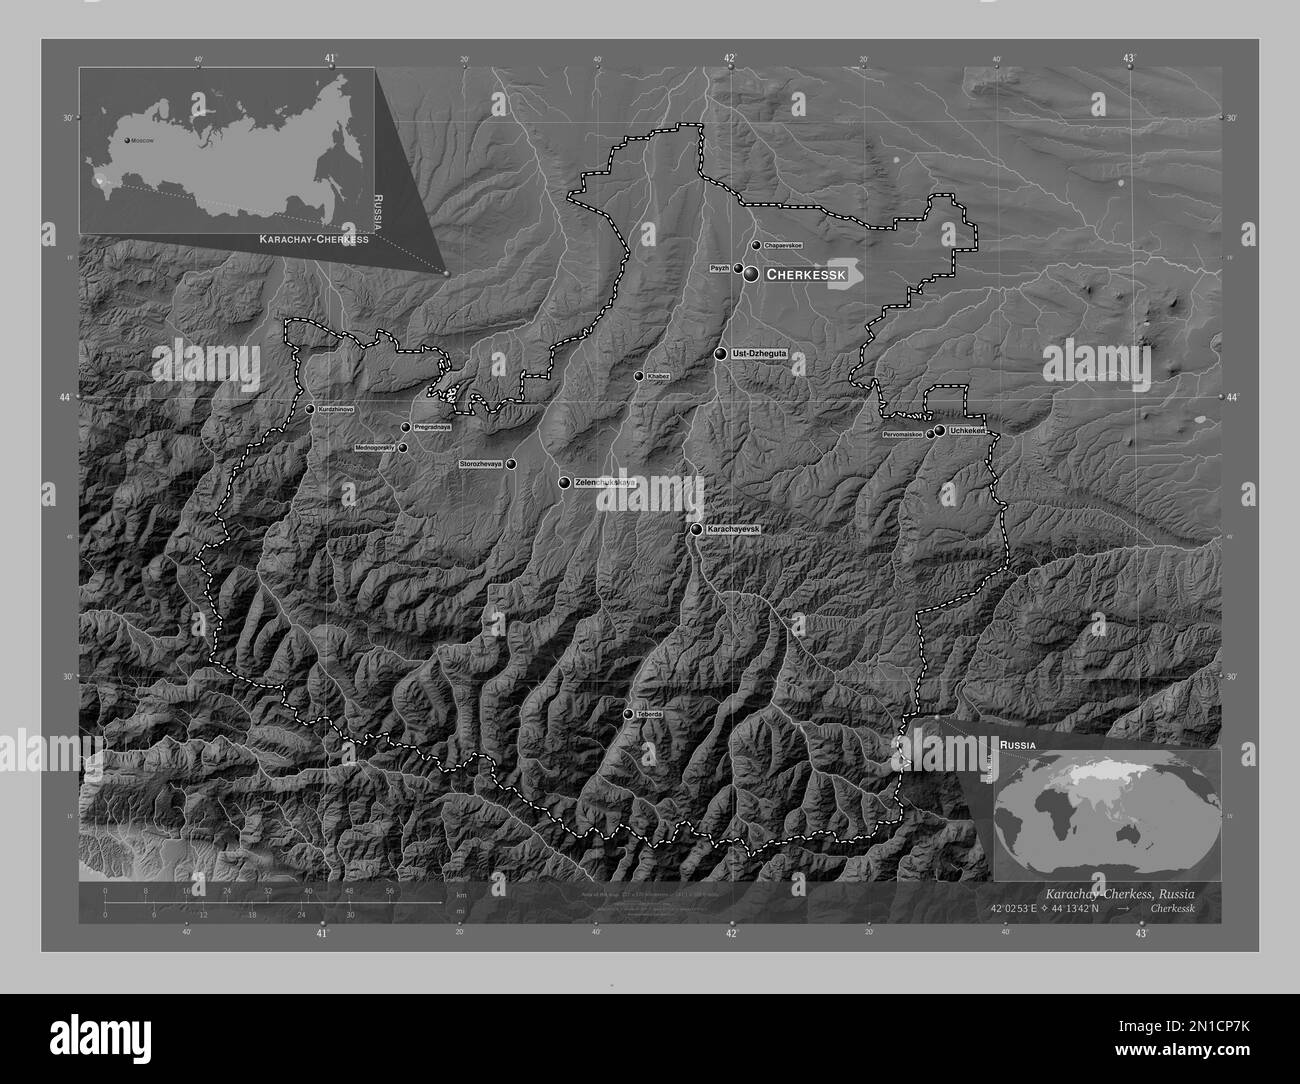 Karachay-Cherkess, republic of Russia. Grayscale elevation map with lakes and rivers. Locations and names of major cities of the region. Corner auxili Stock Photo